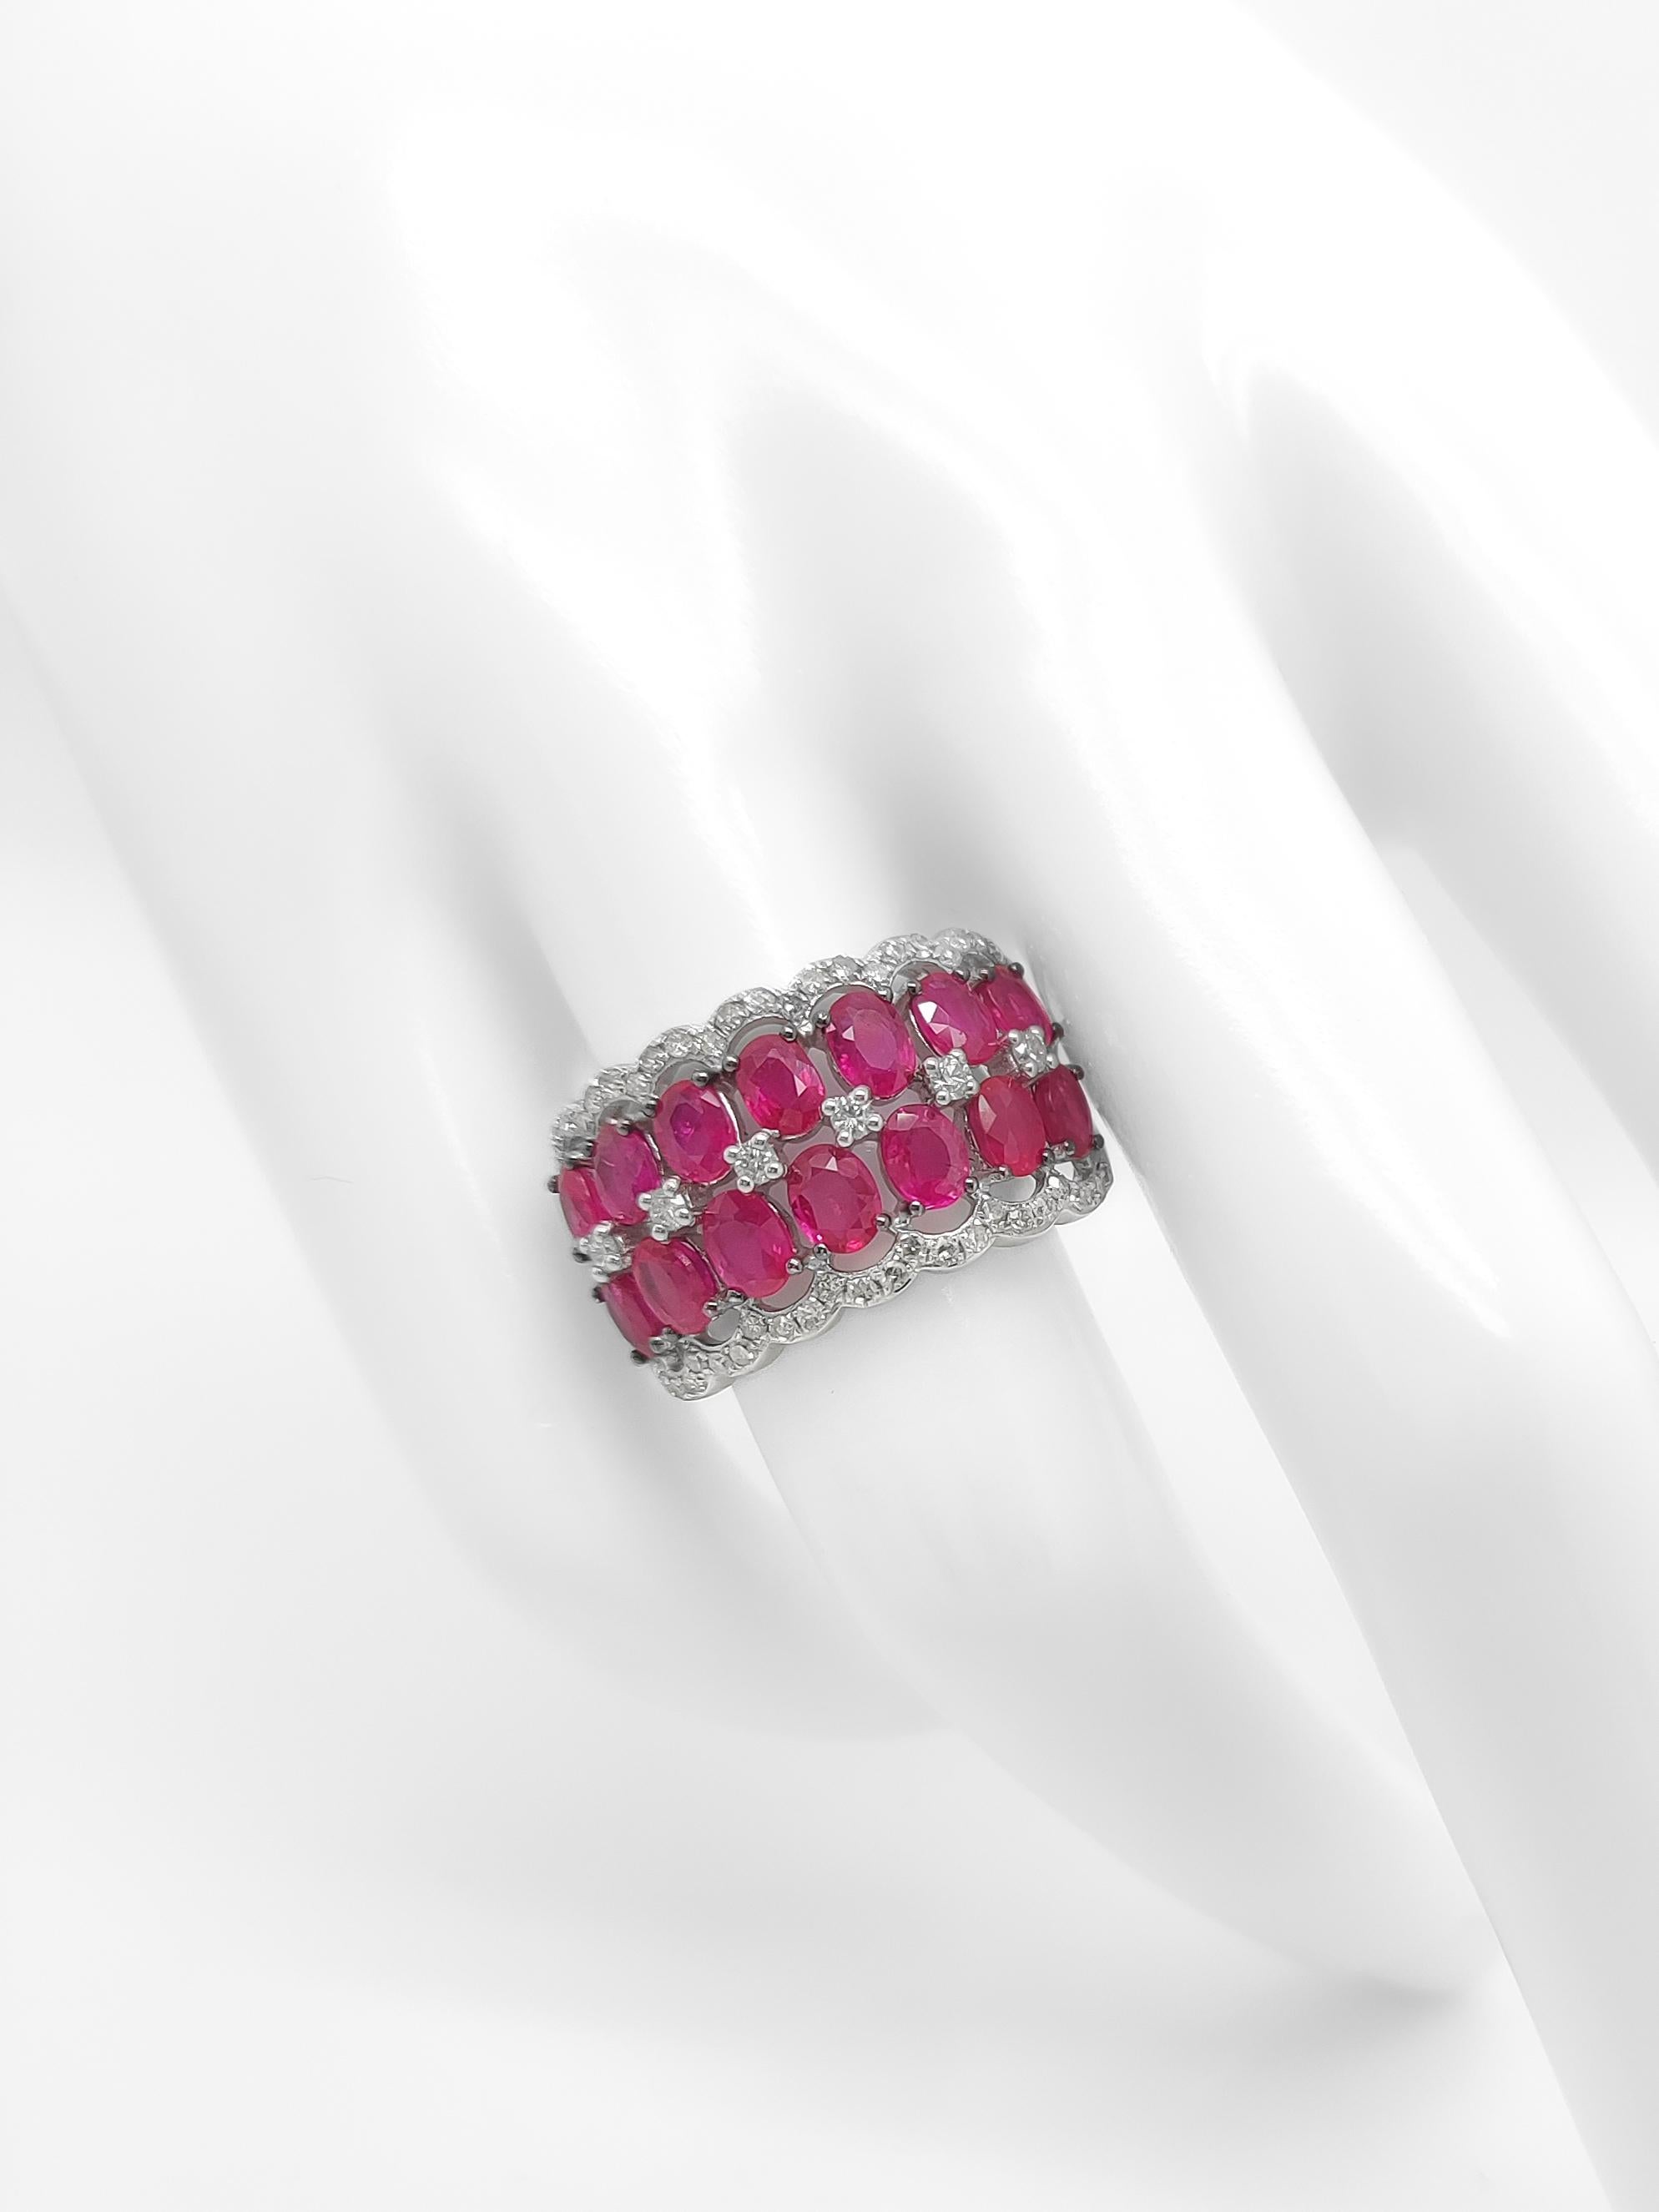 NO RESERVE 3.64CT Ruby & 0.47CT Diamond 14K White Gold Ring For Sale 1